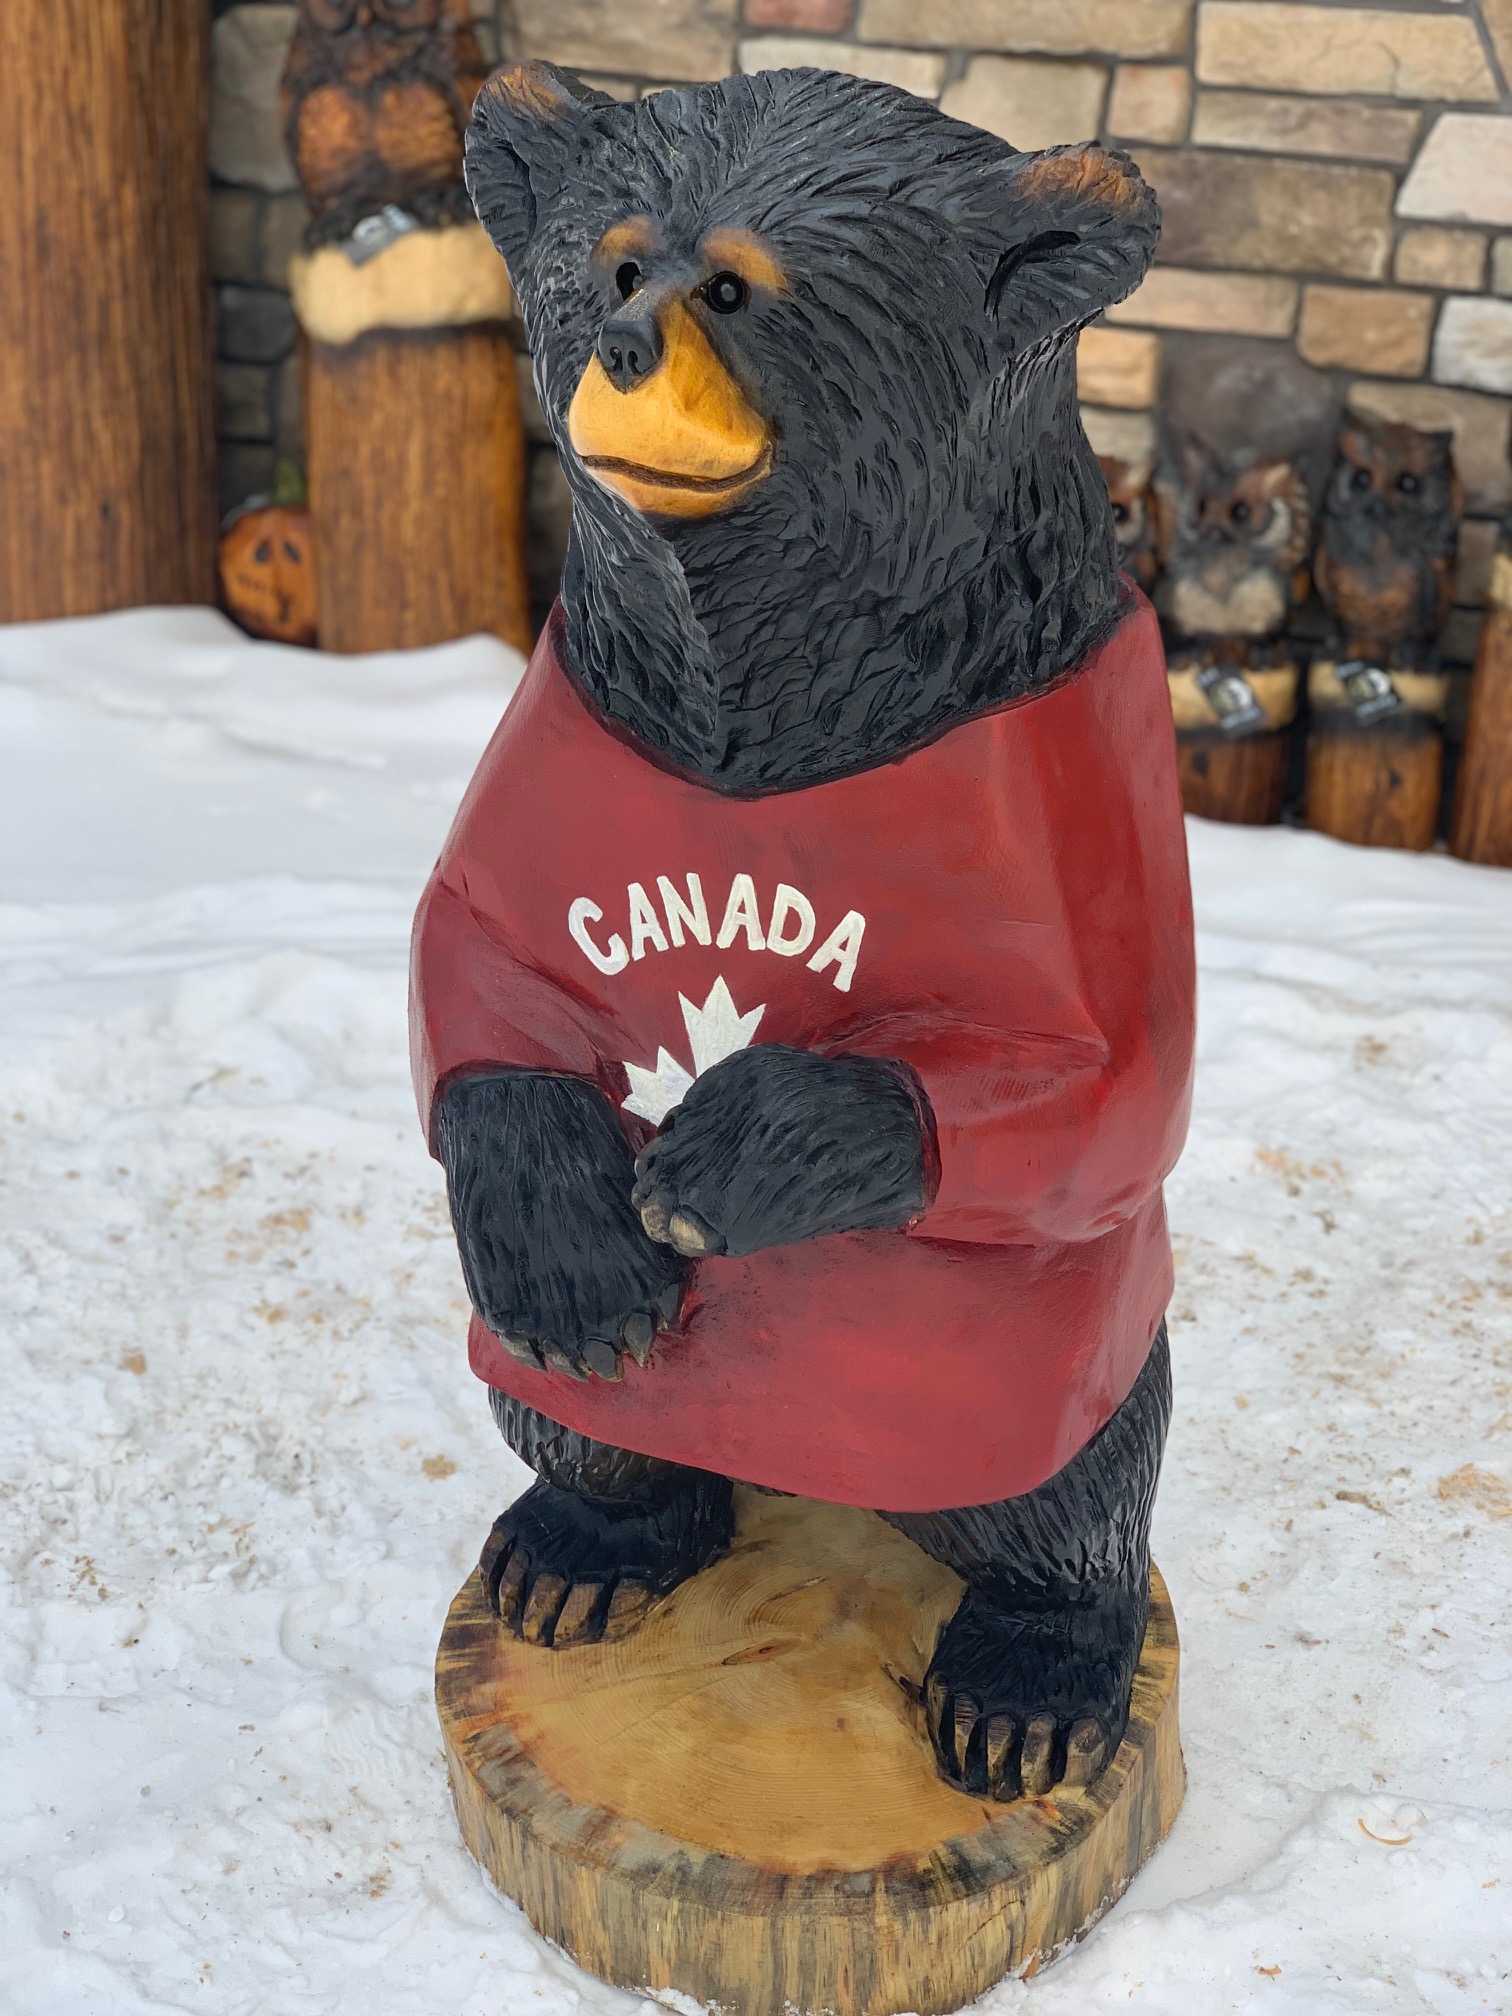 Featured image for “Team Canada Bear Carving”